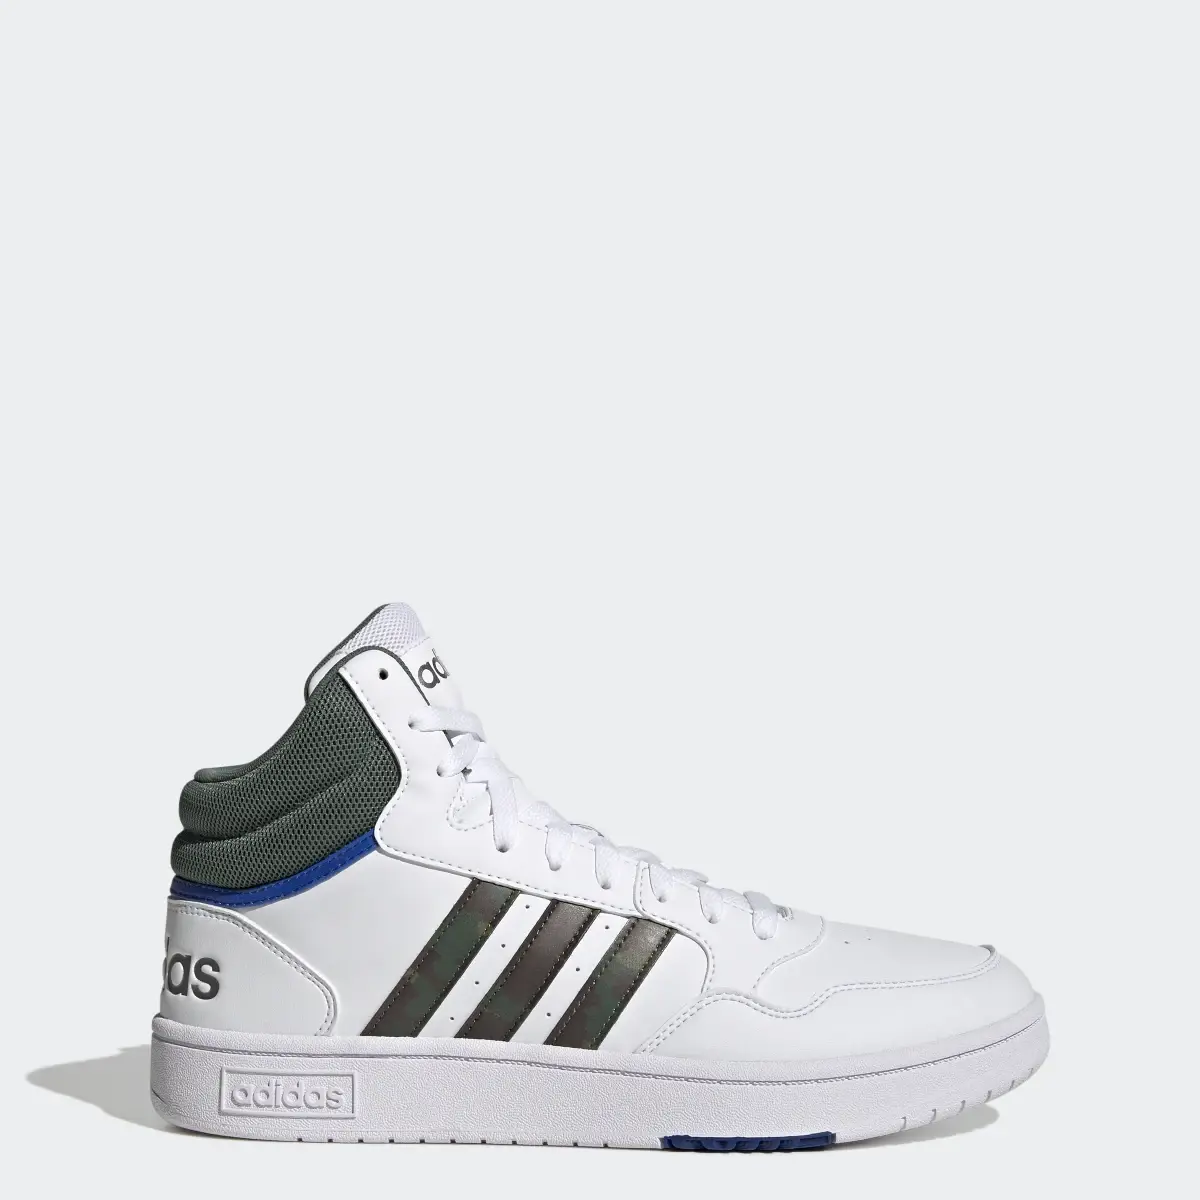 Adidas Hoops 3.0 Mid Classic Vintage Shoes. 1